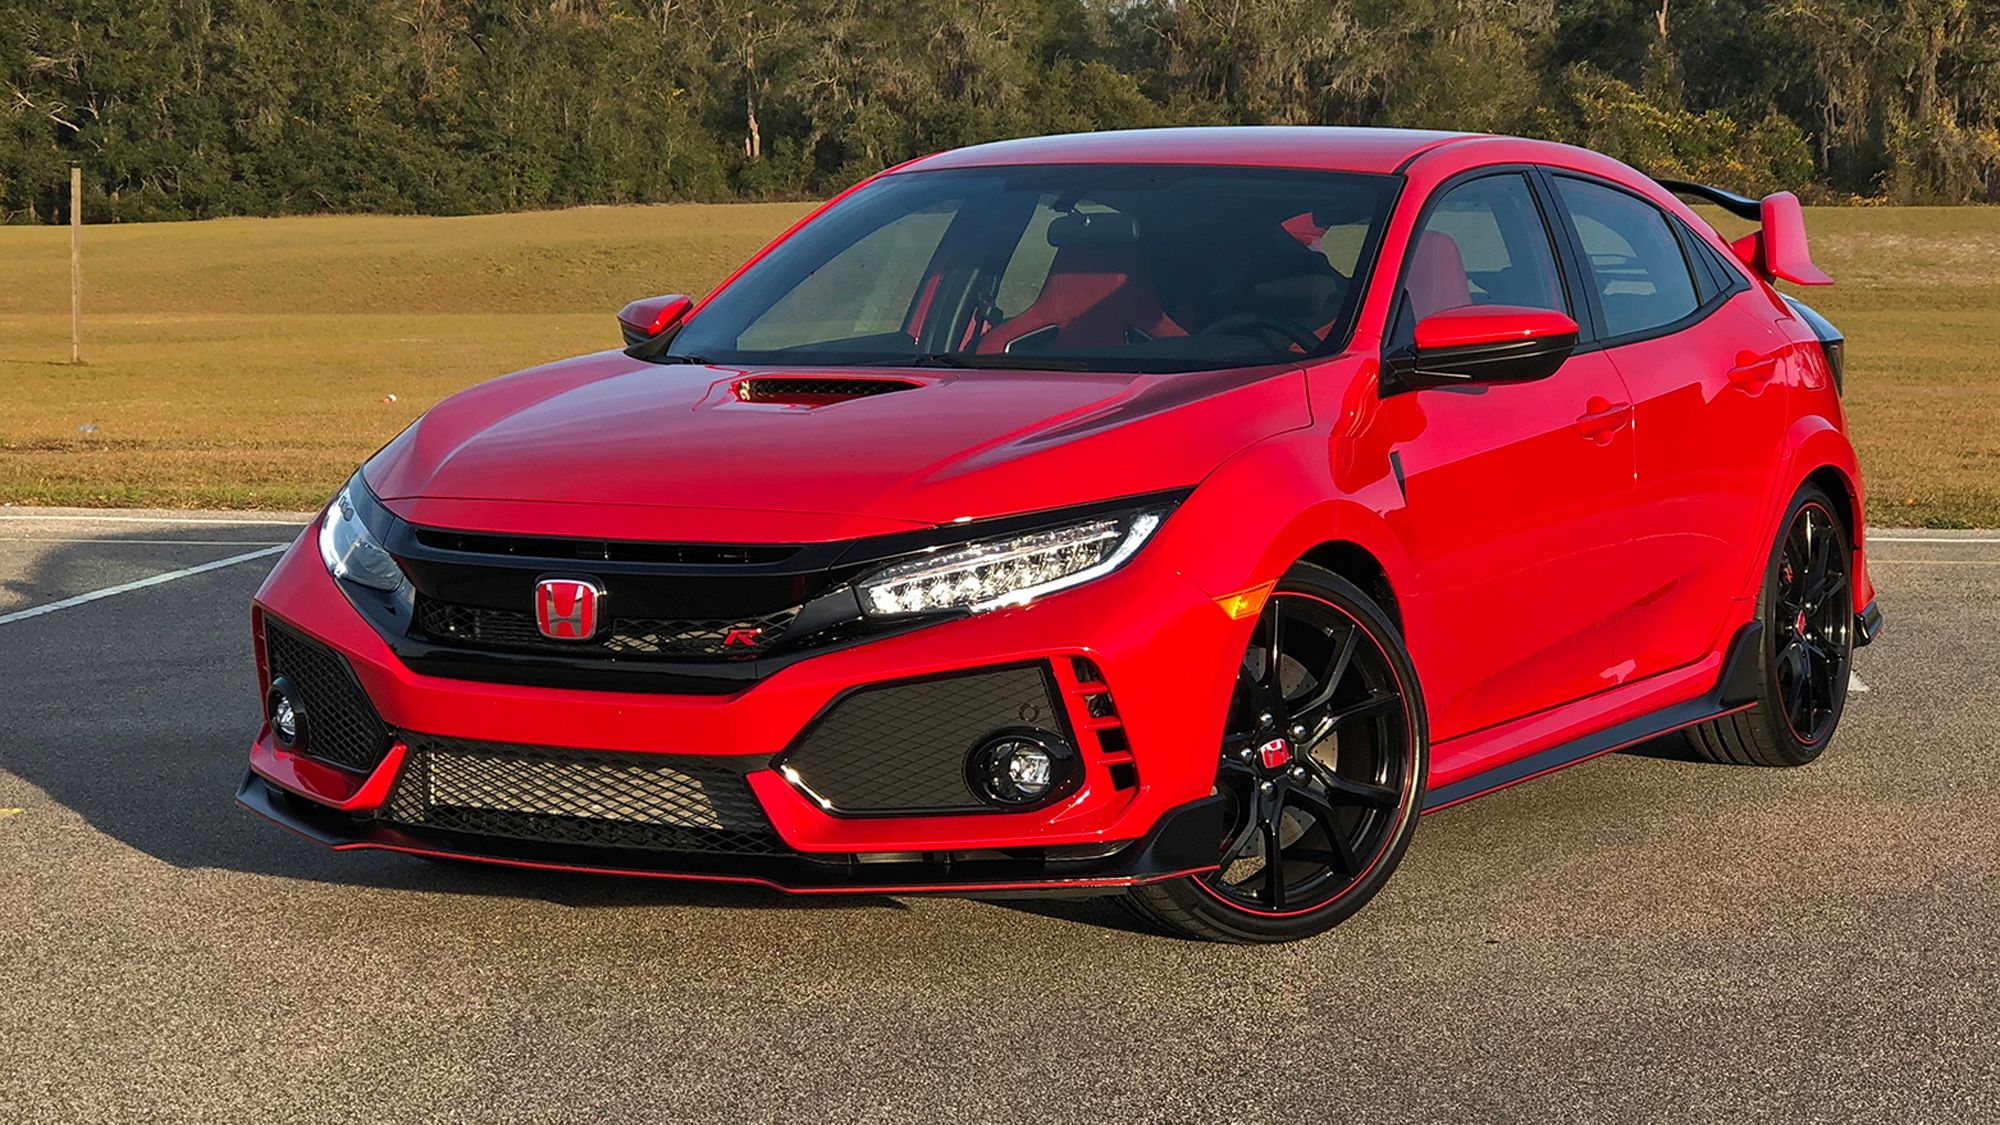 2018 Turns Out The 2017 Honda Civic Type R Makes a Good Daily Driver